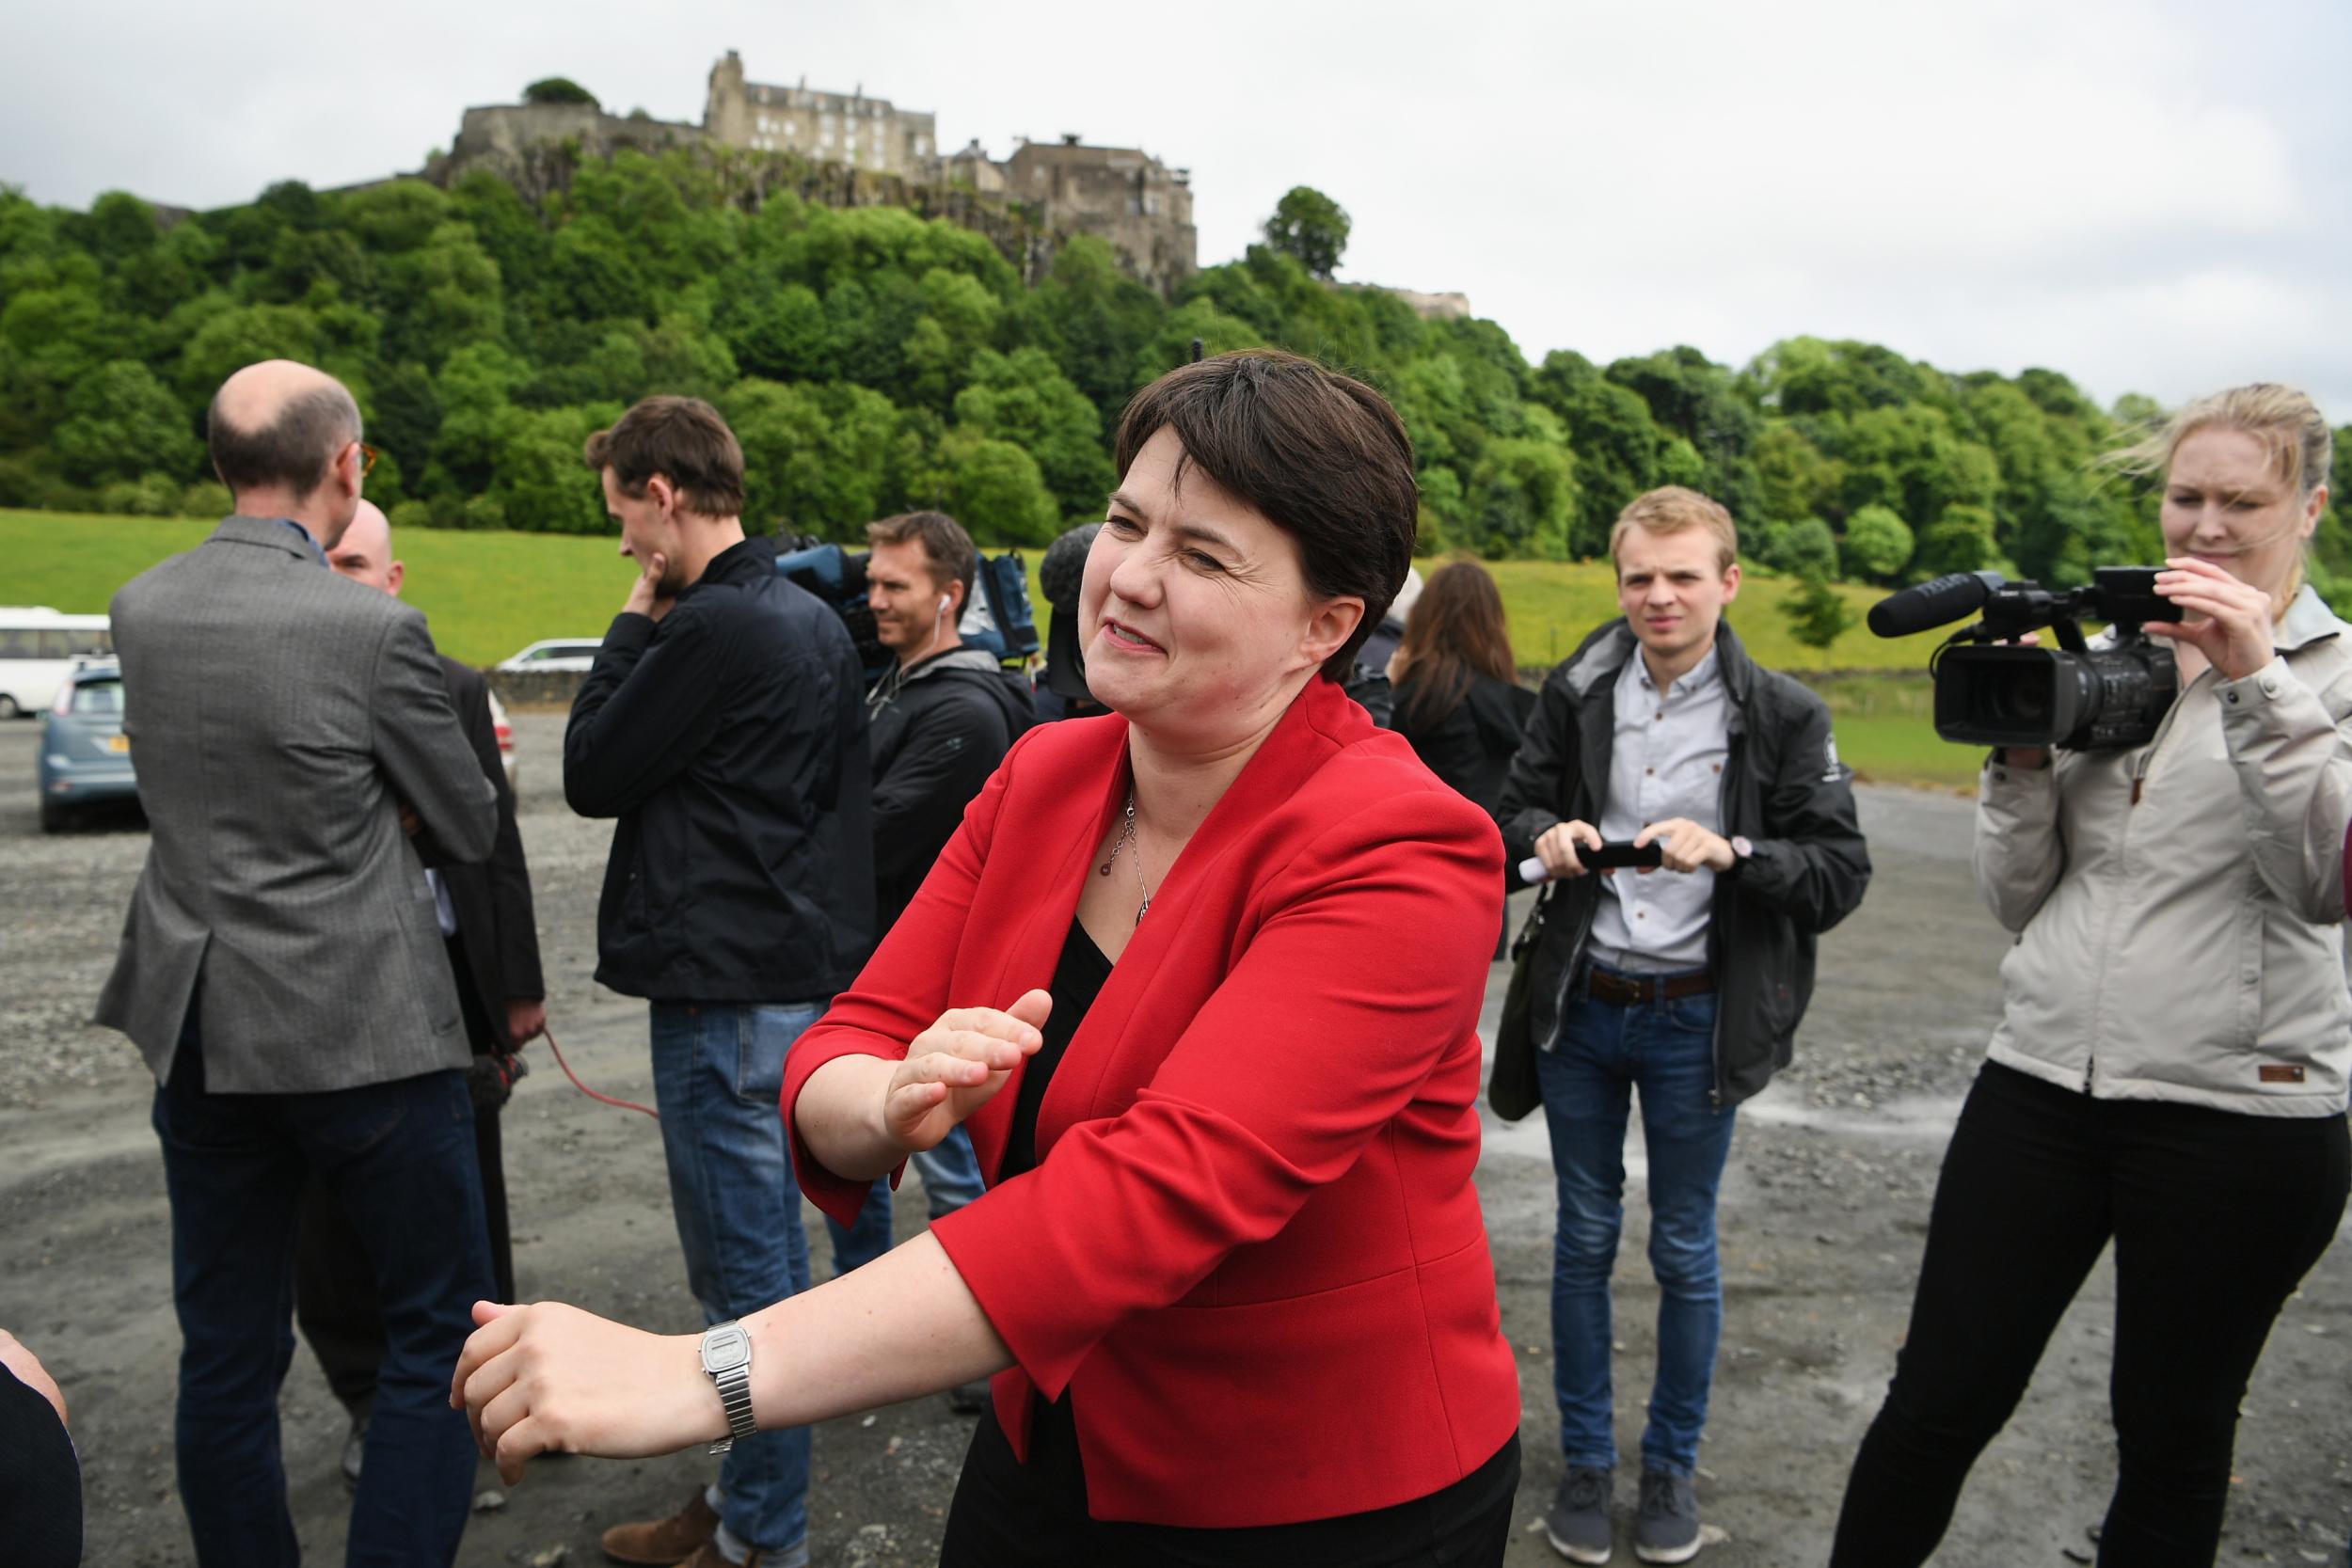 Davidson has taken a markedly different tone on immigration than that often taken in Whitehall